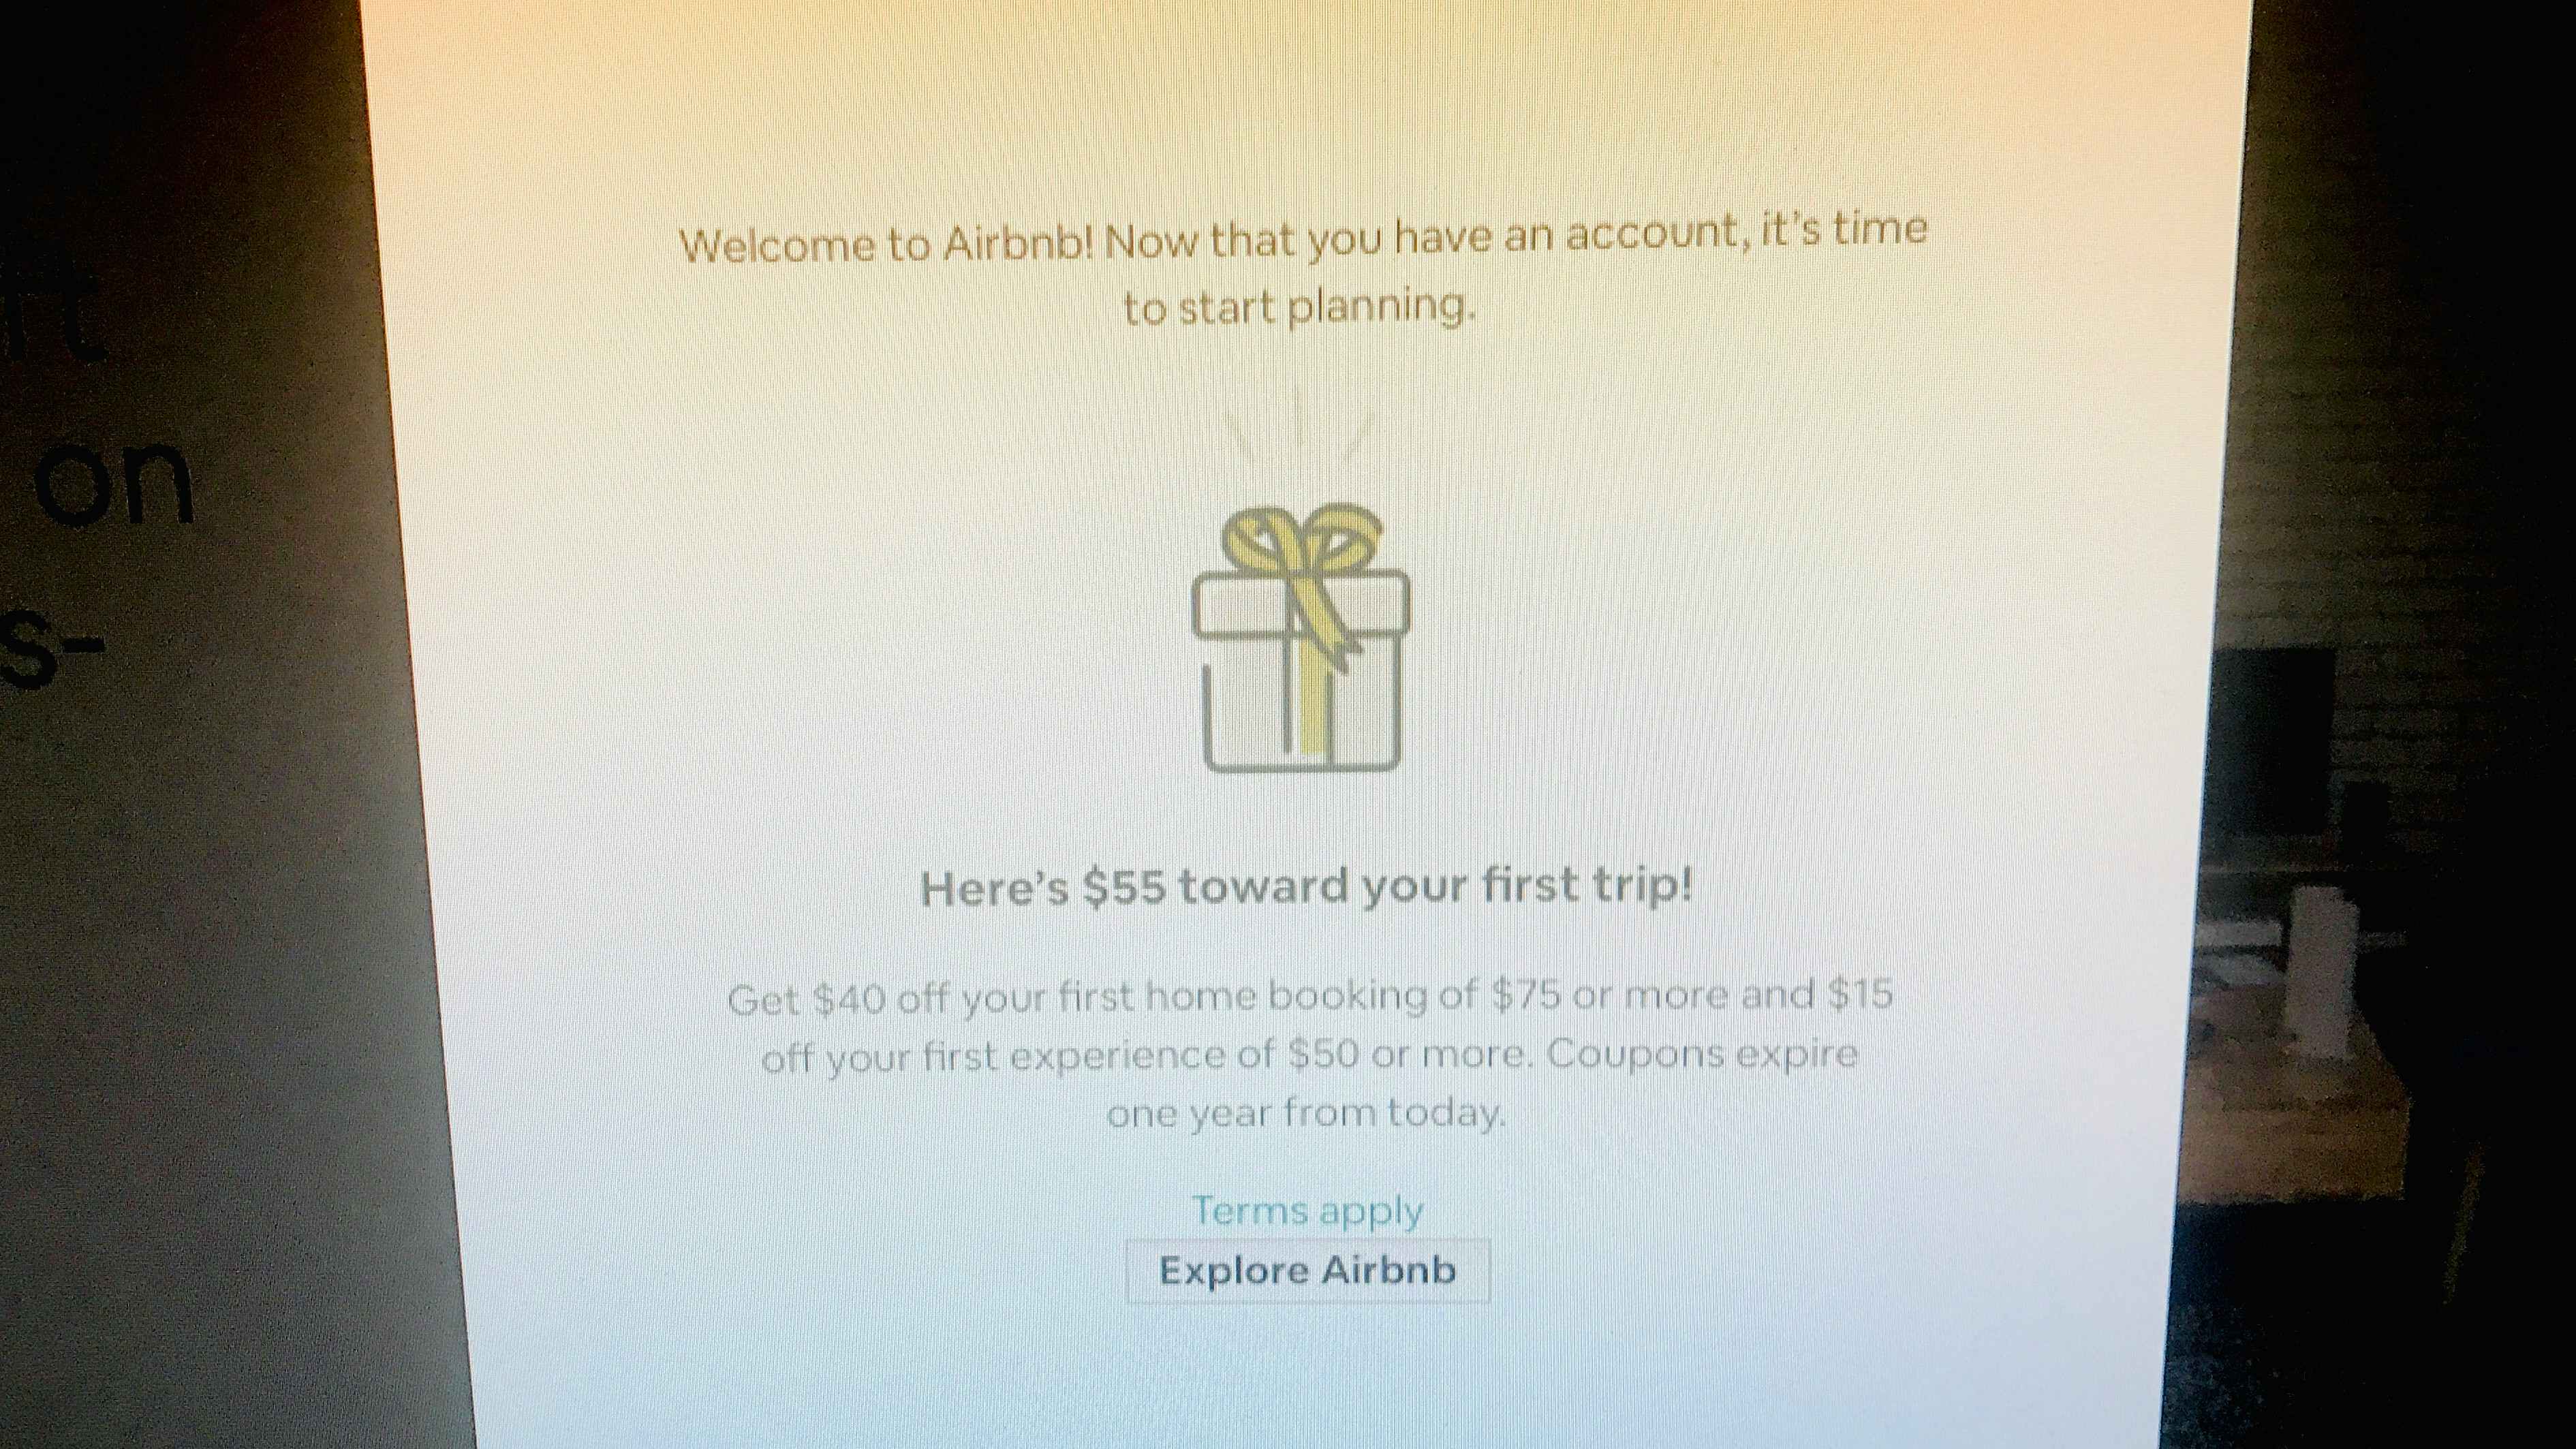 Get $55 off your first Airbnb stay.